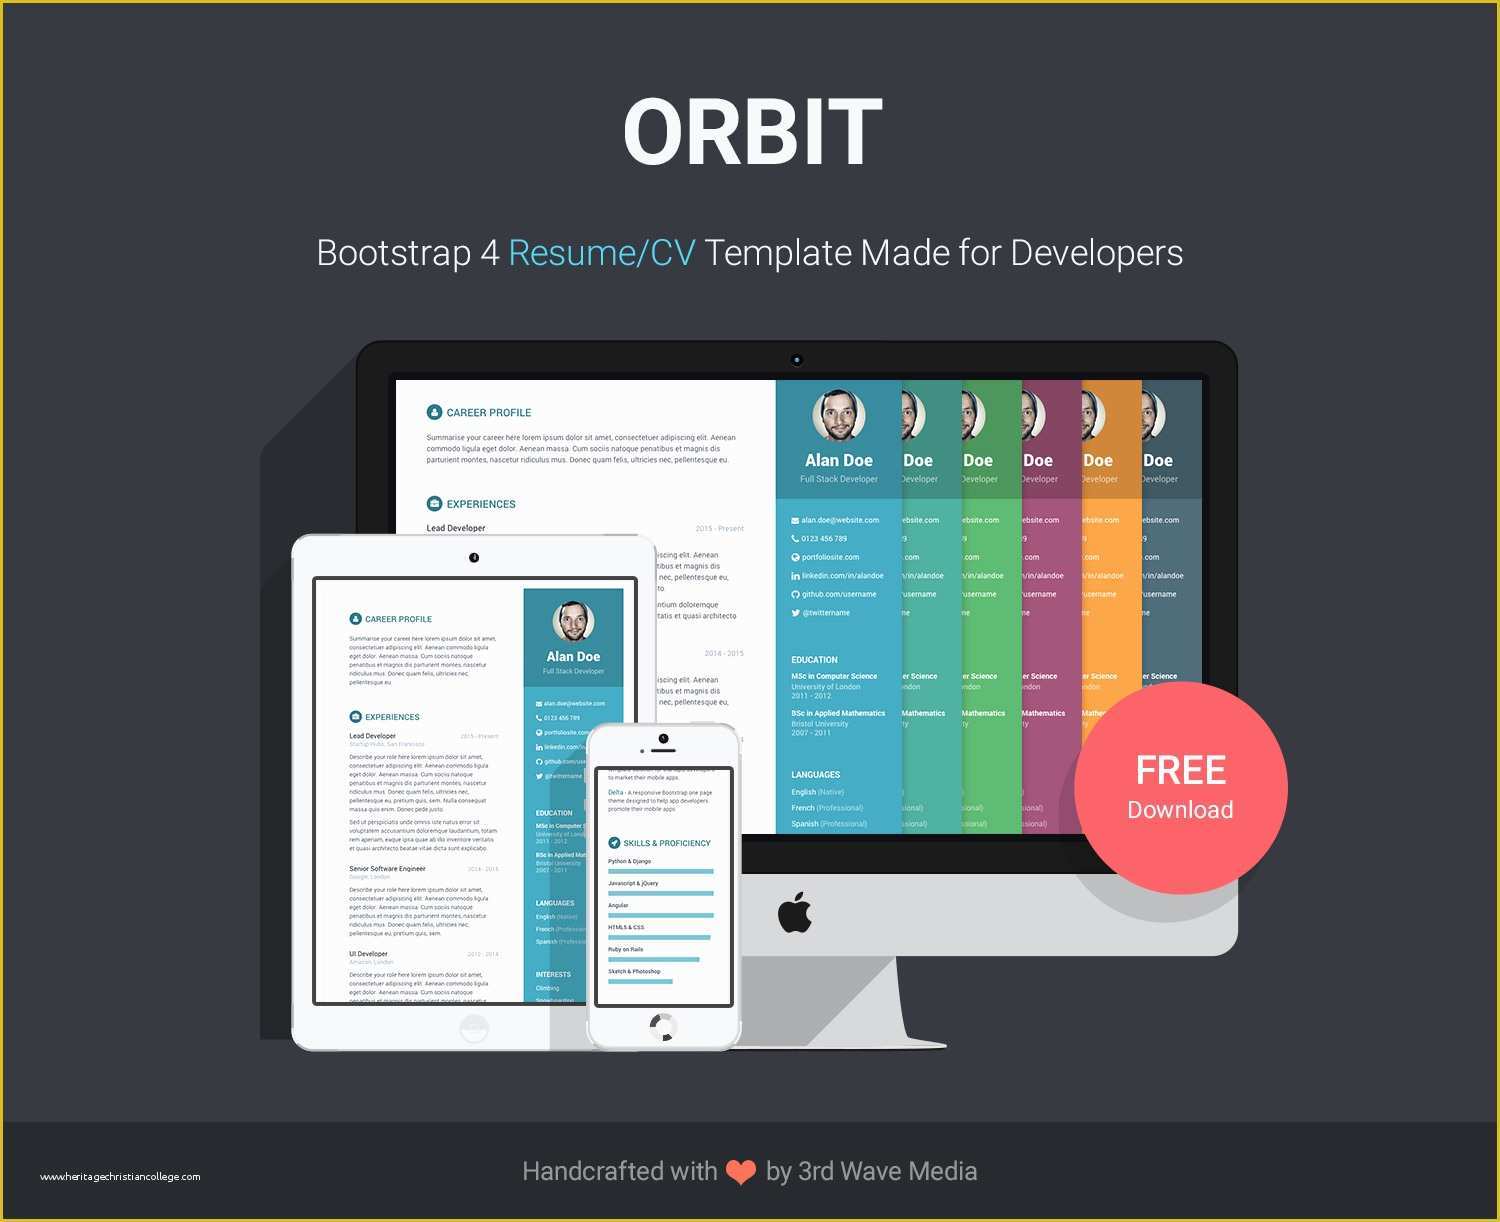 Bootstrap Templates Free Download Of Free Bootstrap Resume Cv Template for Developers orbit